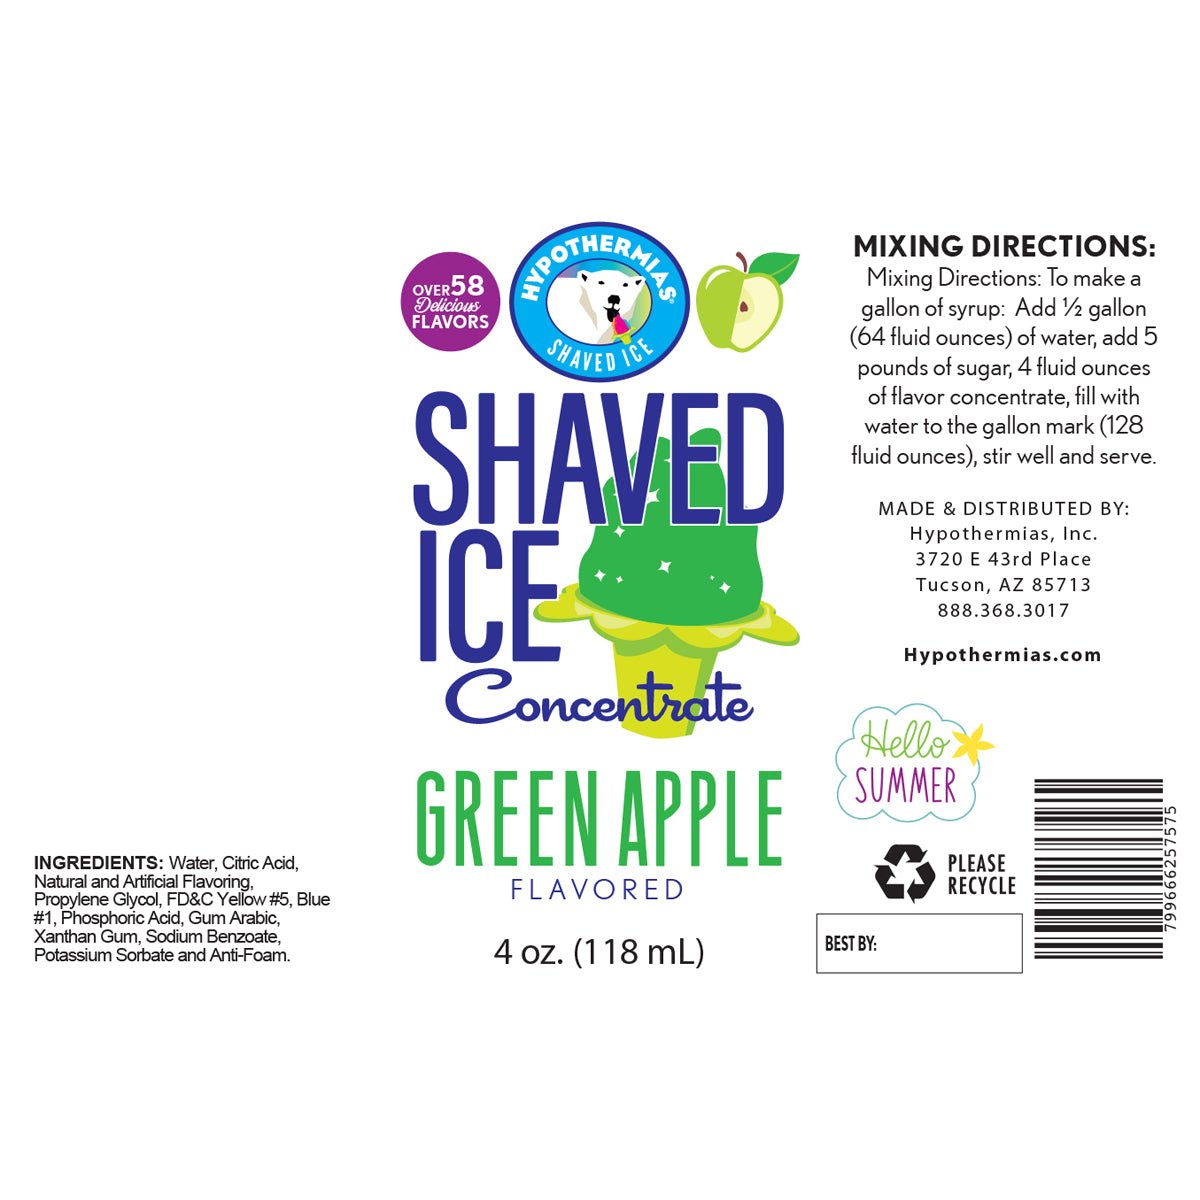 Hypothermias green apple shaved ice or snow cone flavor syrup concentrate ingredient label.